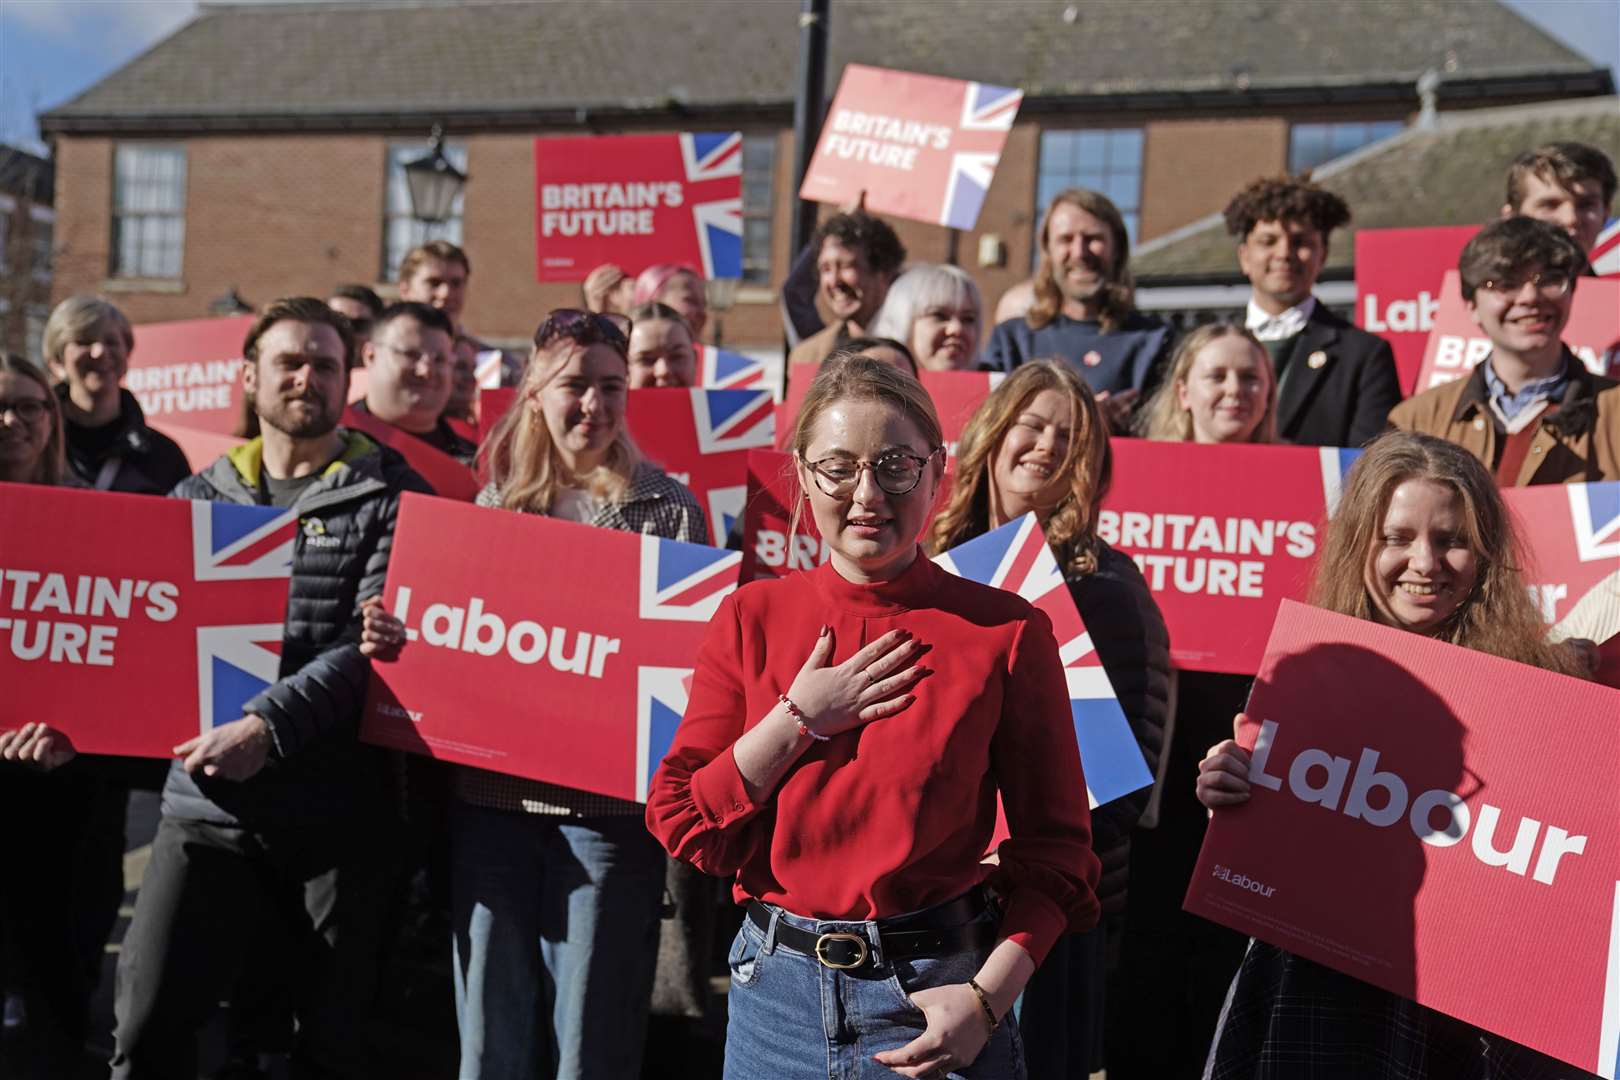 Newly elected Labour MP Gen Kitchen surrounded by Labour party supporters after being declared winner in the Wellingborough by-election (Joe Giddens/PA)